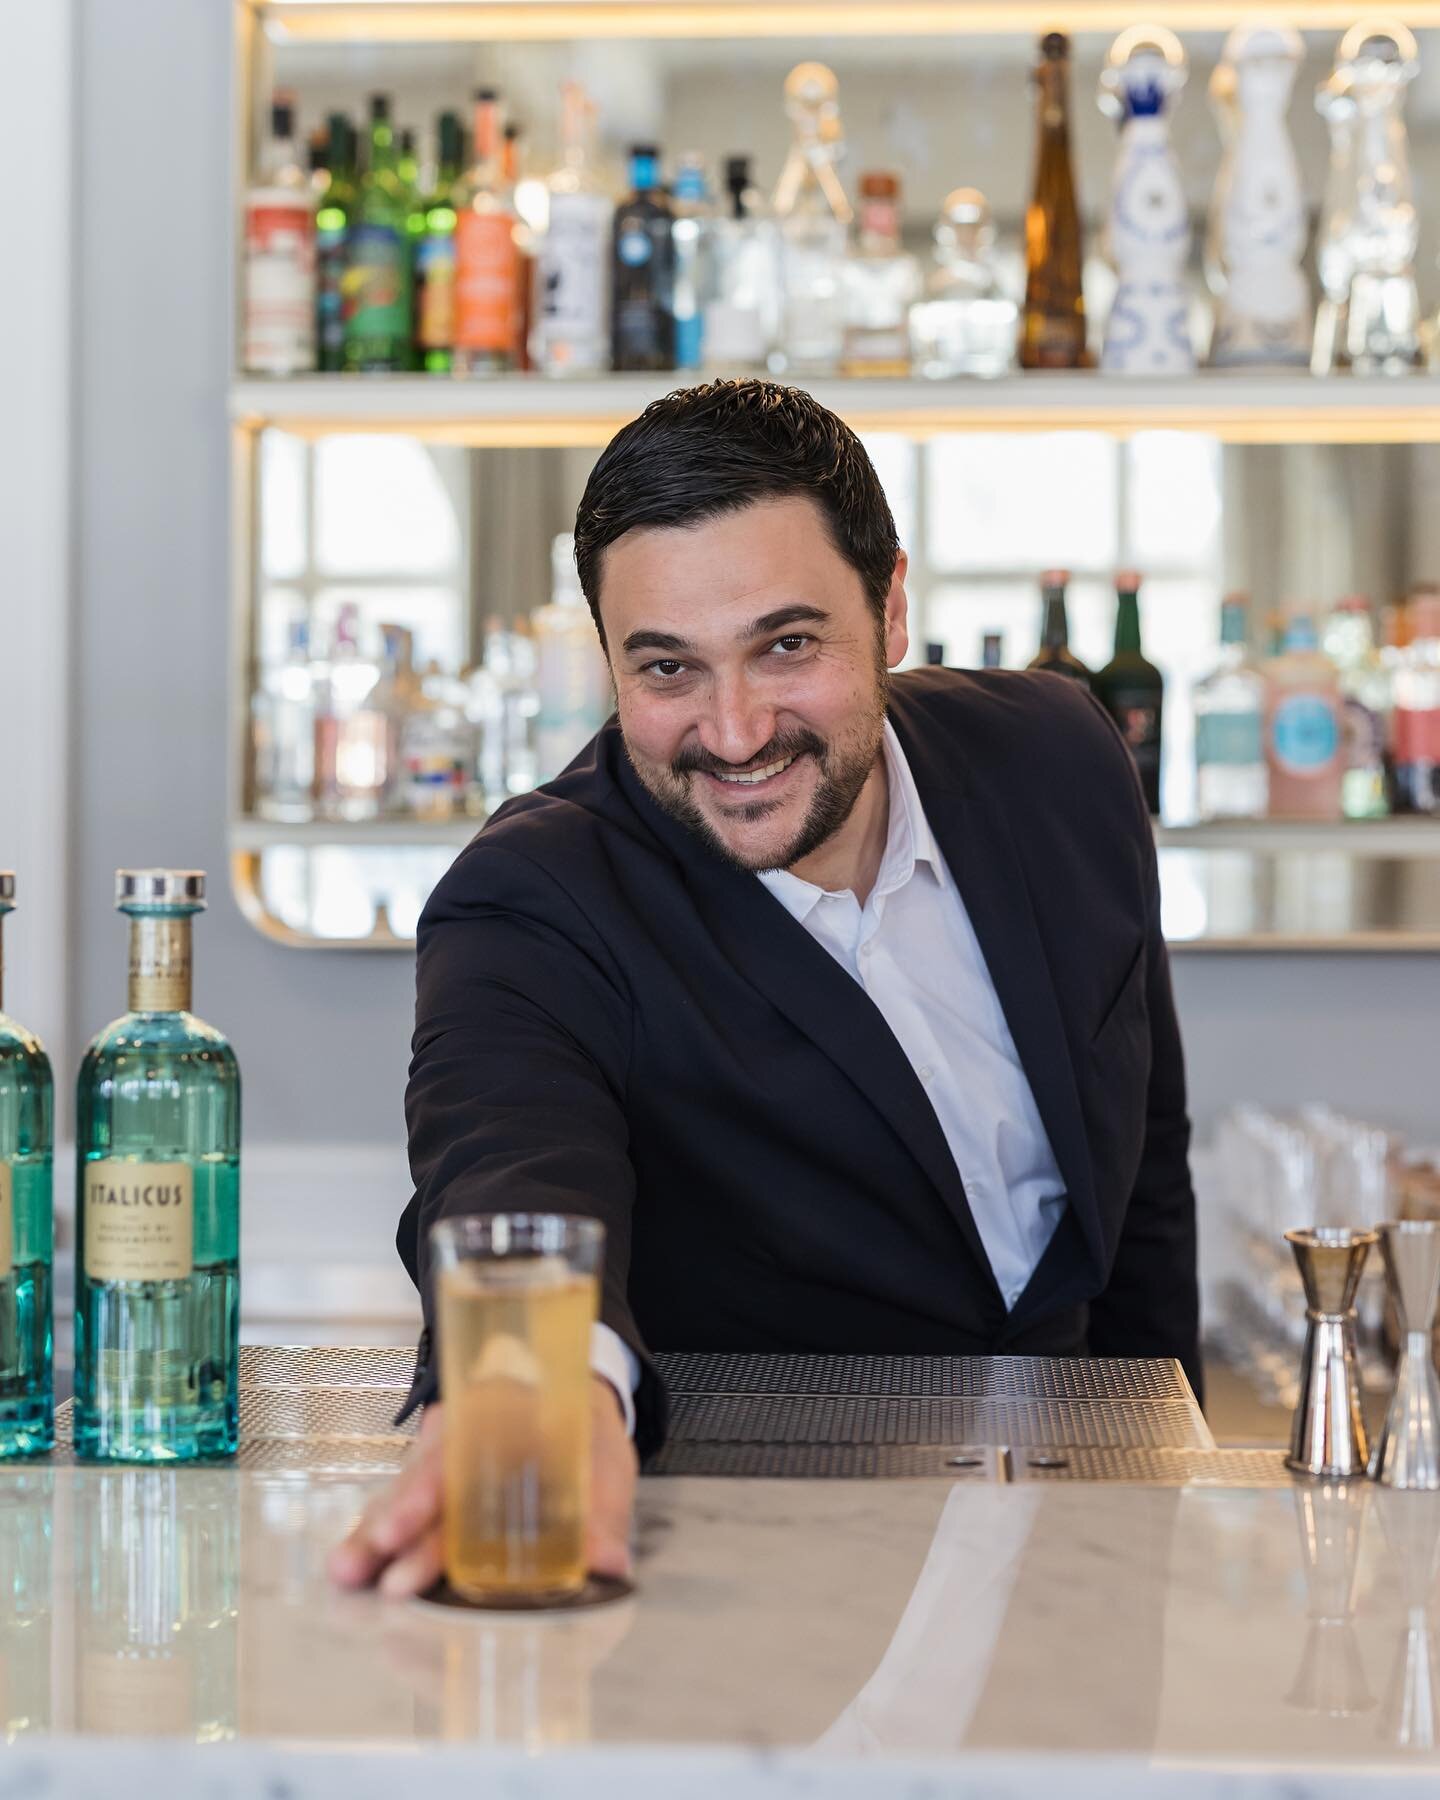 Tea Time, but make it in the Cocktail Week style! @mattiapastori_official guest at @no5_thebar served for the whole #SMCW his special Afternoon Tea, made with passion and @italicusrdb ! 

#SMCW #stmoritzcocktailweek #smcw24 #LikeInAMovie #drinklessdr